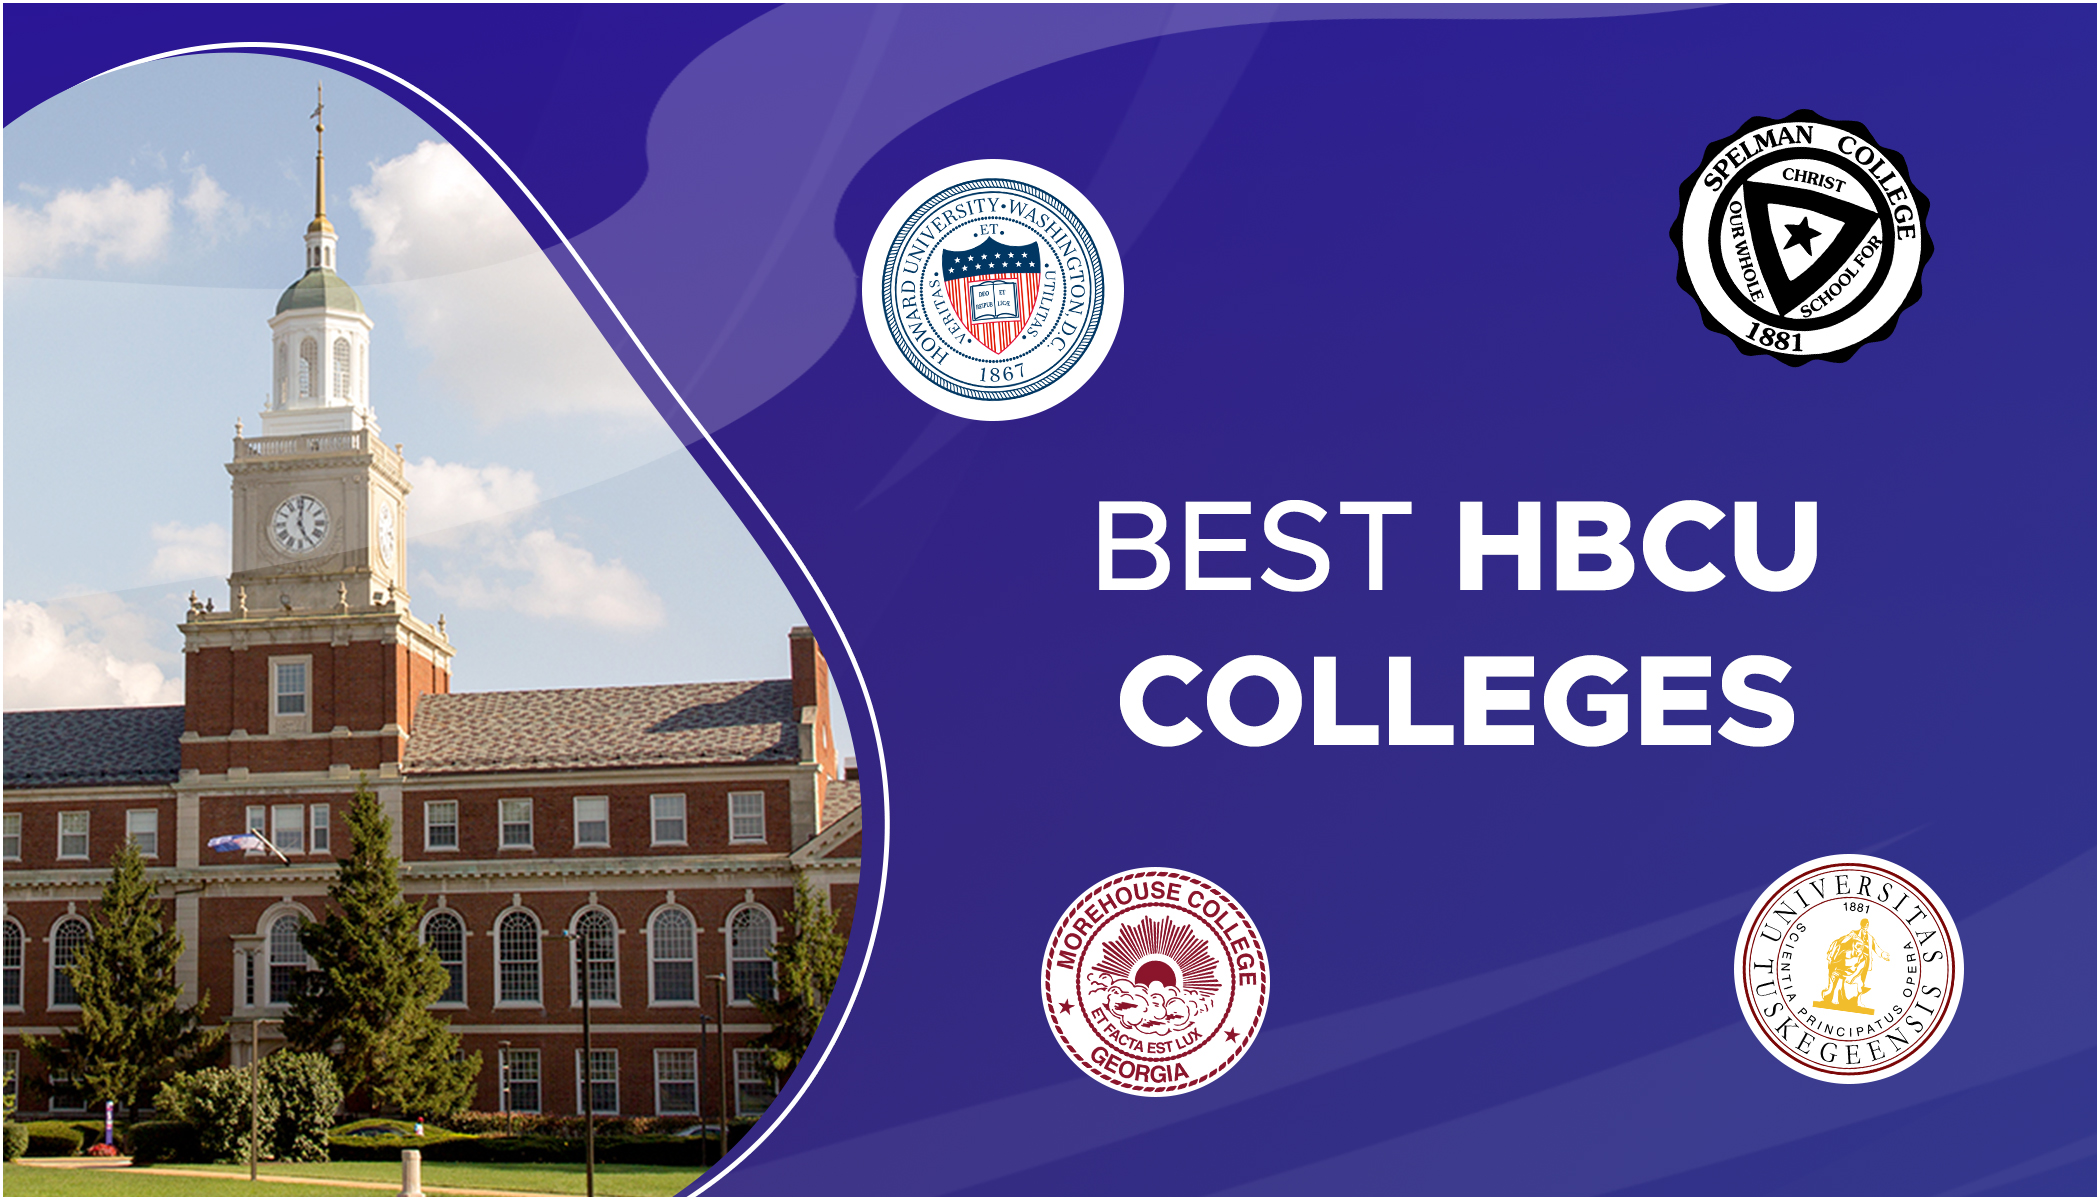 Best HBCU Colleges Historically Black Colleges and Universities